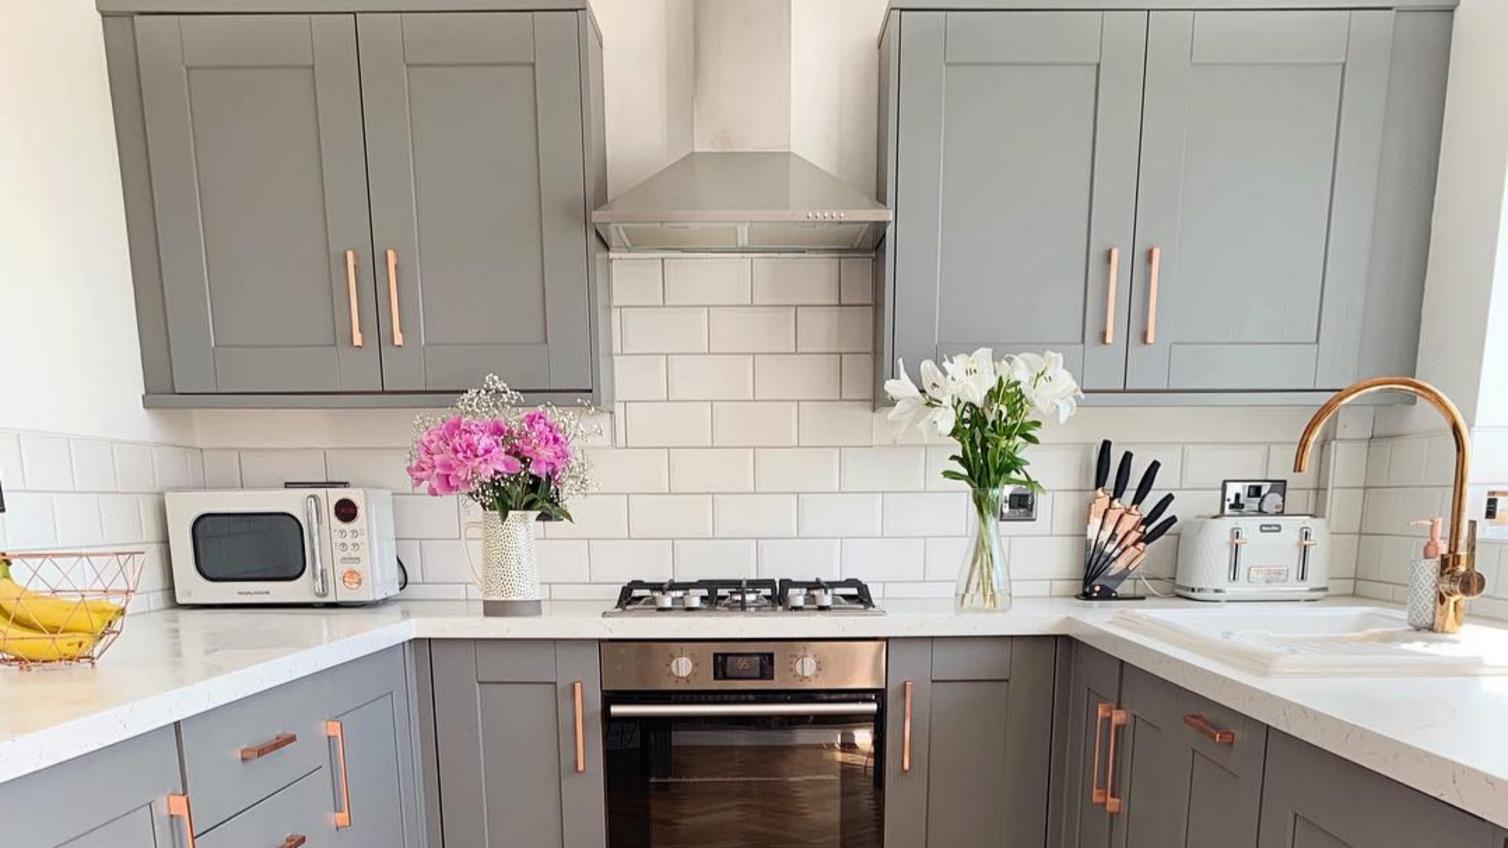 Fairford slate grey kitchen with copper handles, an oak chevron floor, white countertops and white subway tiles.